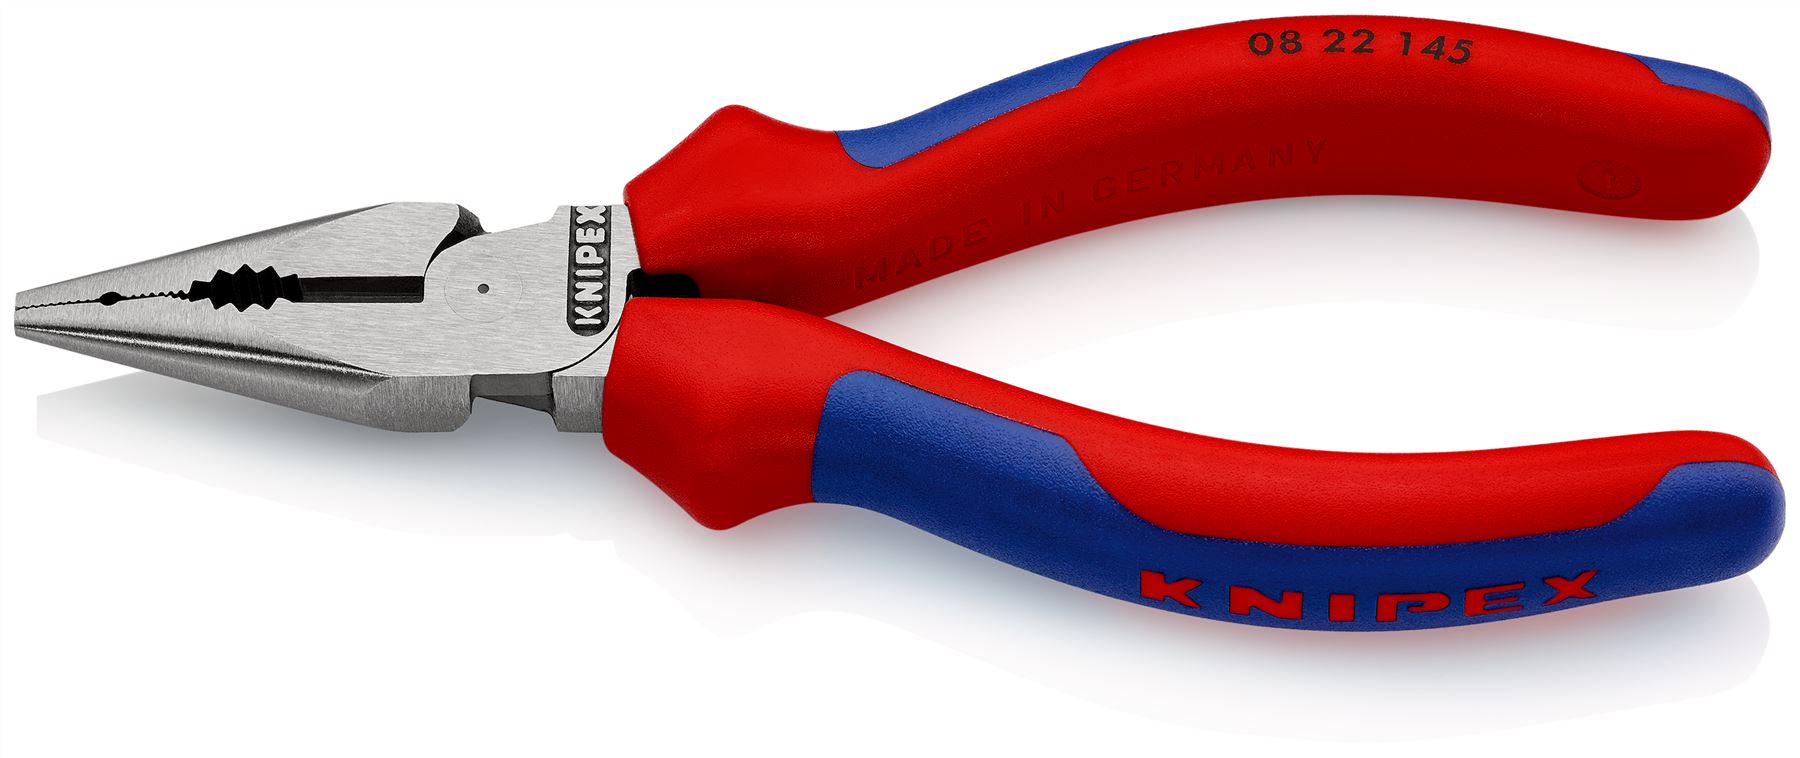 Knipex Needle Nose Combination Pliers 145mm Multi Component Grips 08 22 145